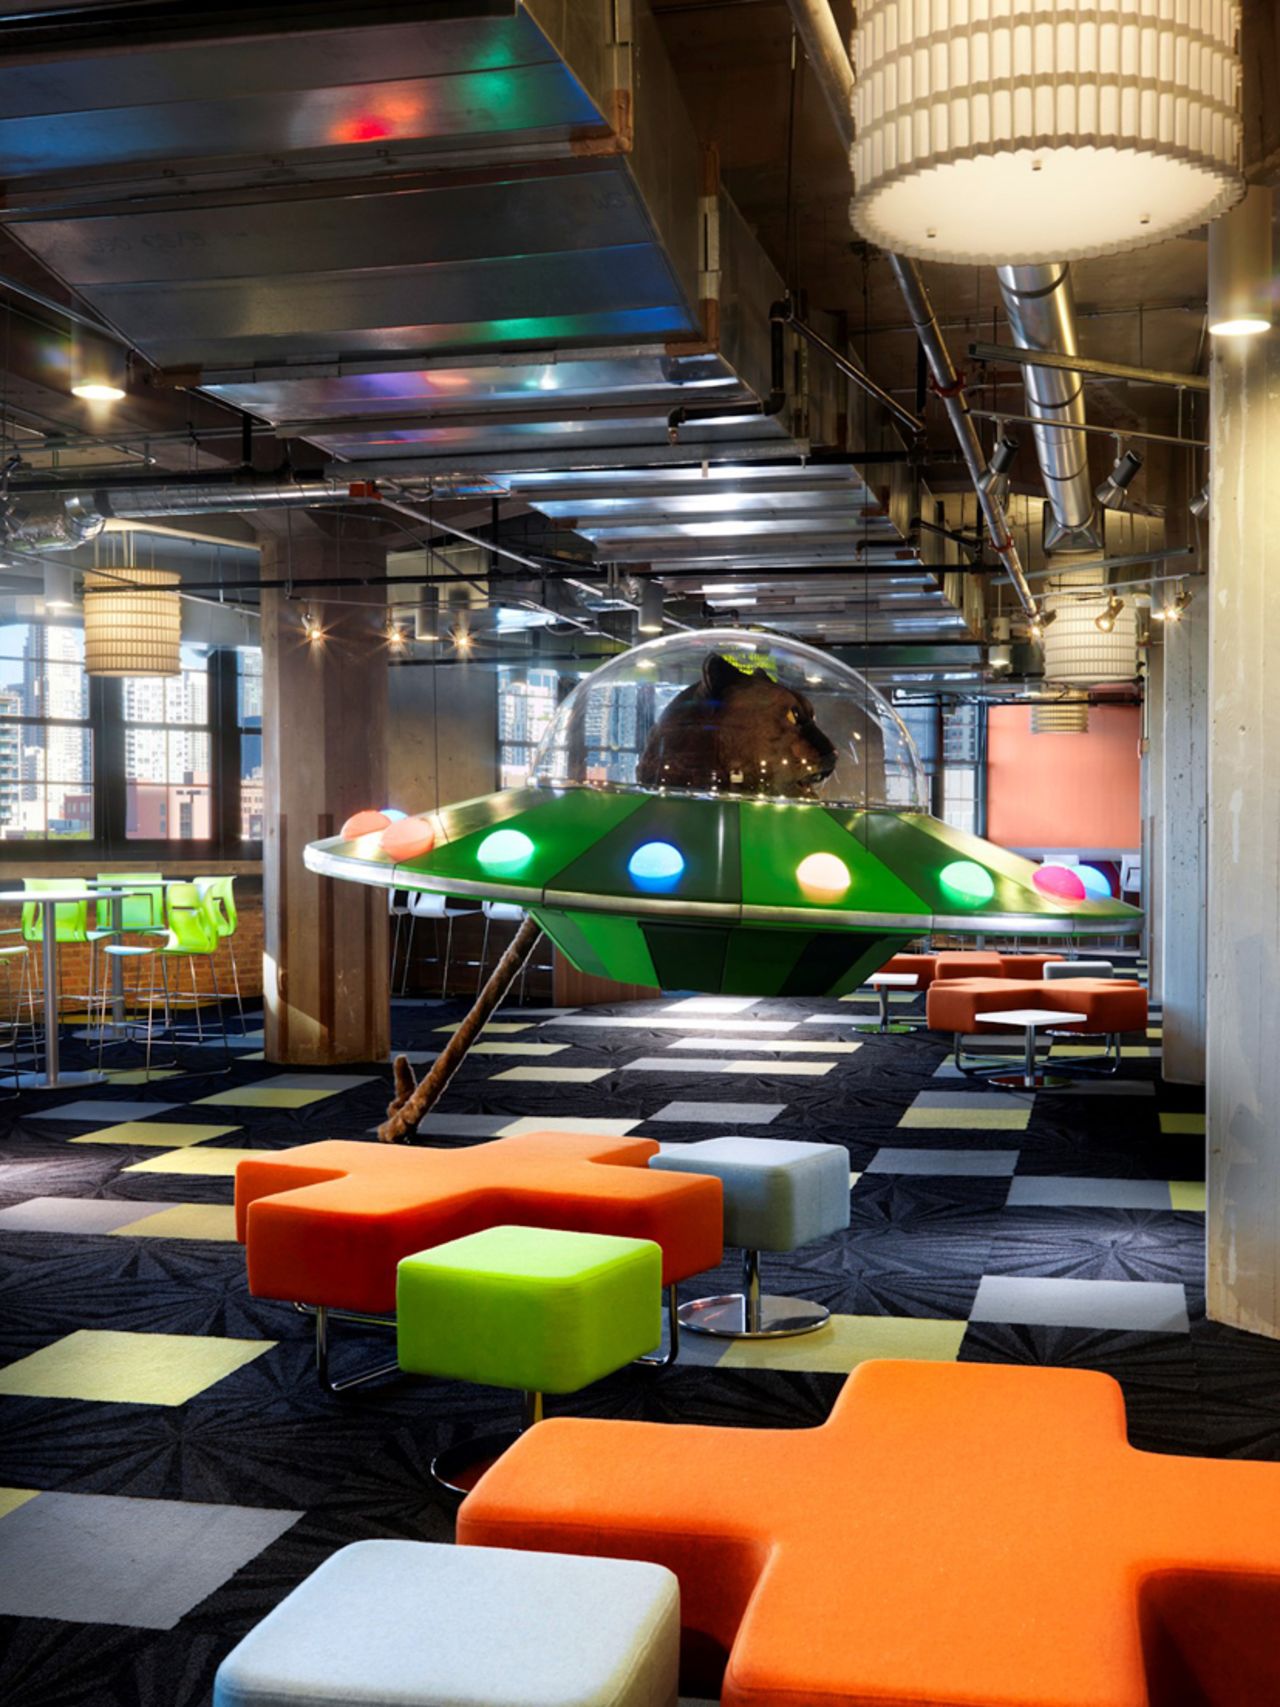 Internationally, Groupon's colorful offices in Chicago include an Enchanted Forest, a Fun Zone with swing sets, and a giant cat in a spaceship. You can tour the office during Chicago's Open House event, October 18-19.